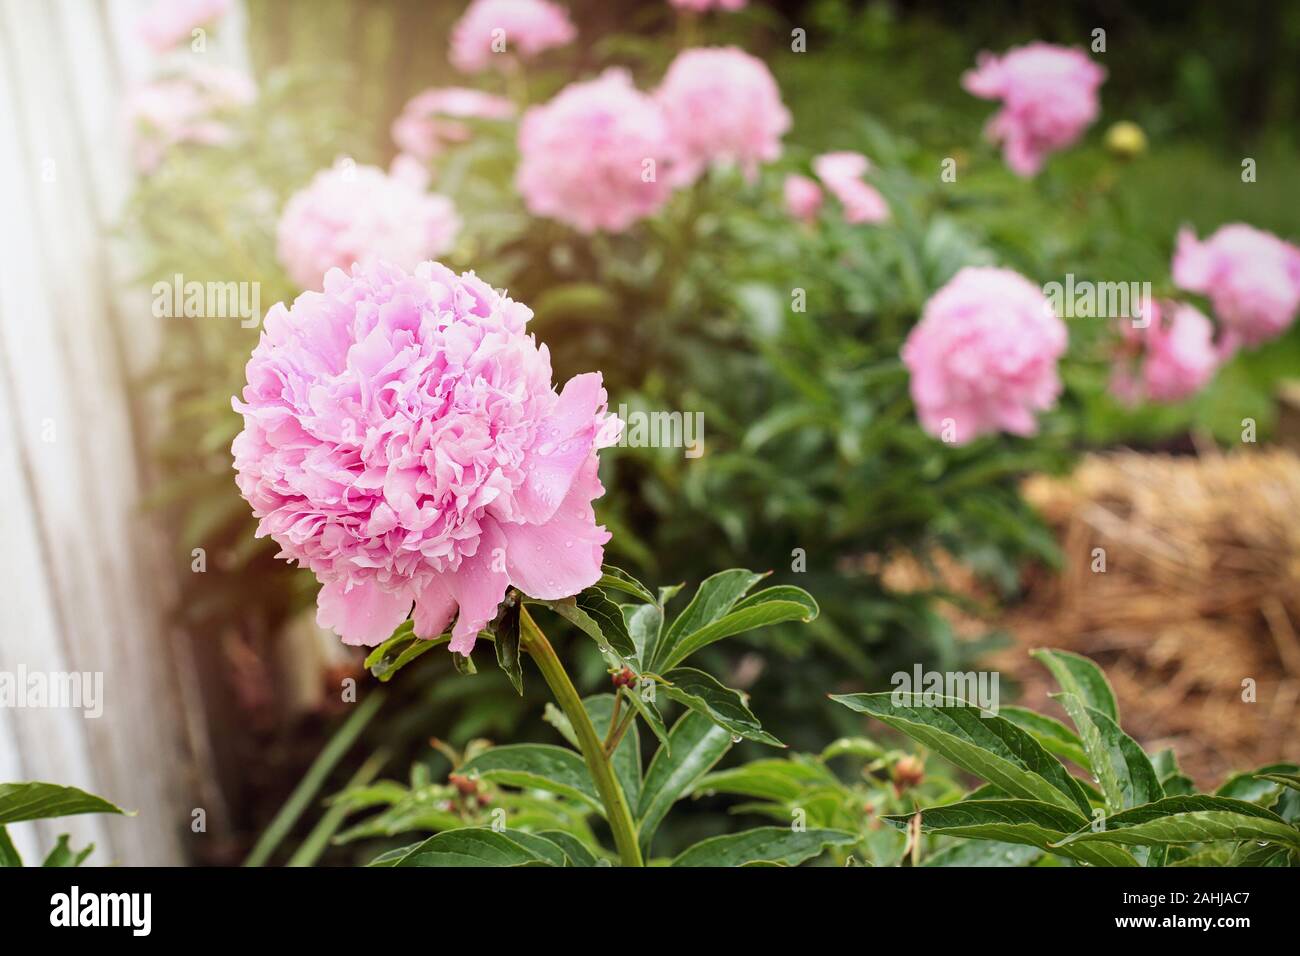 Garden of beautiful blooming pink Peony plants against a white fence. Selective focus on flower in foreground with blurred background. Stock Photo